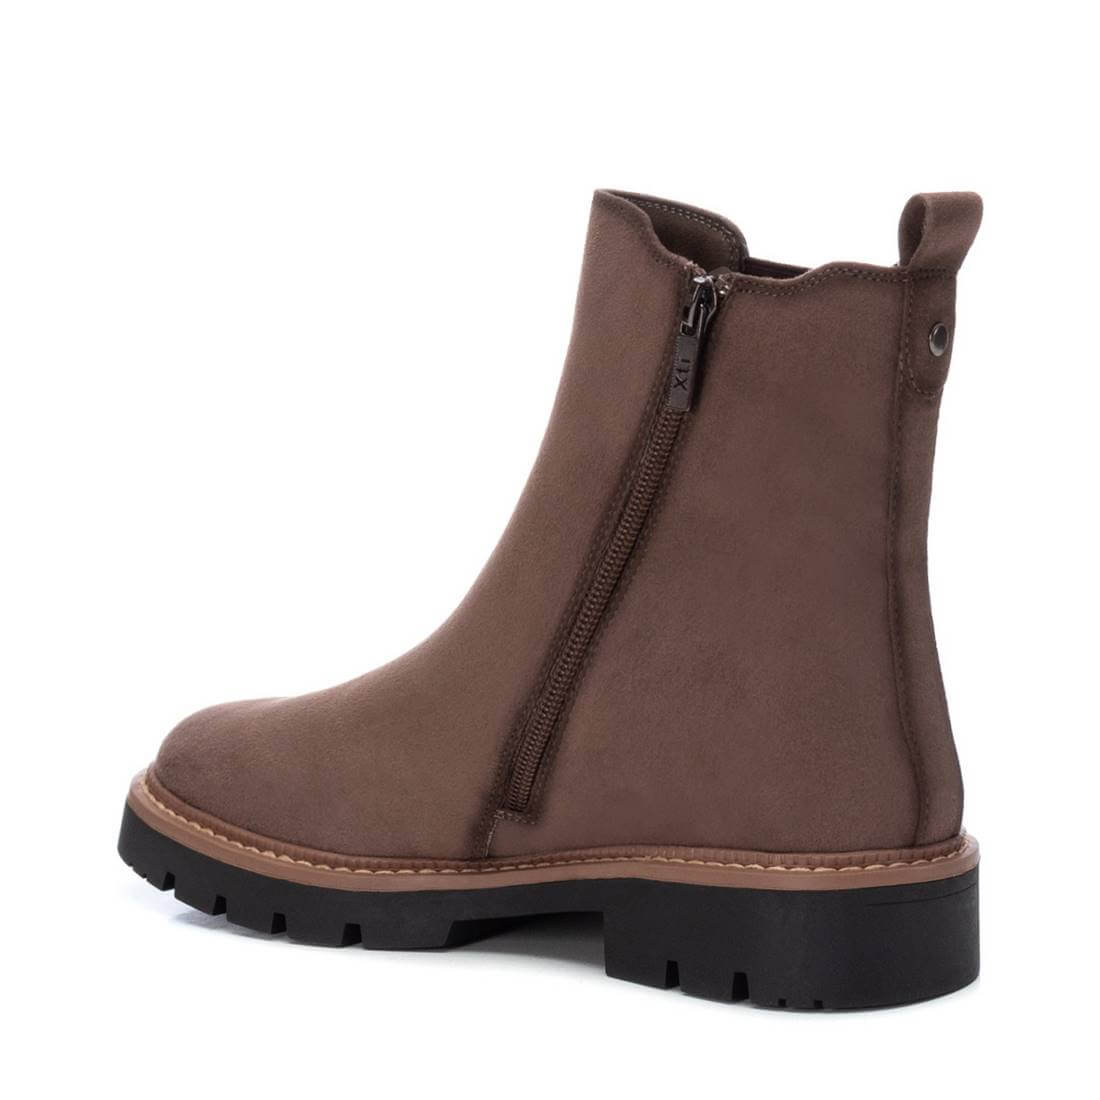 XTI Taupe Ladies Microfibre Ankle Boots